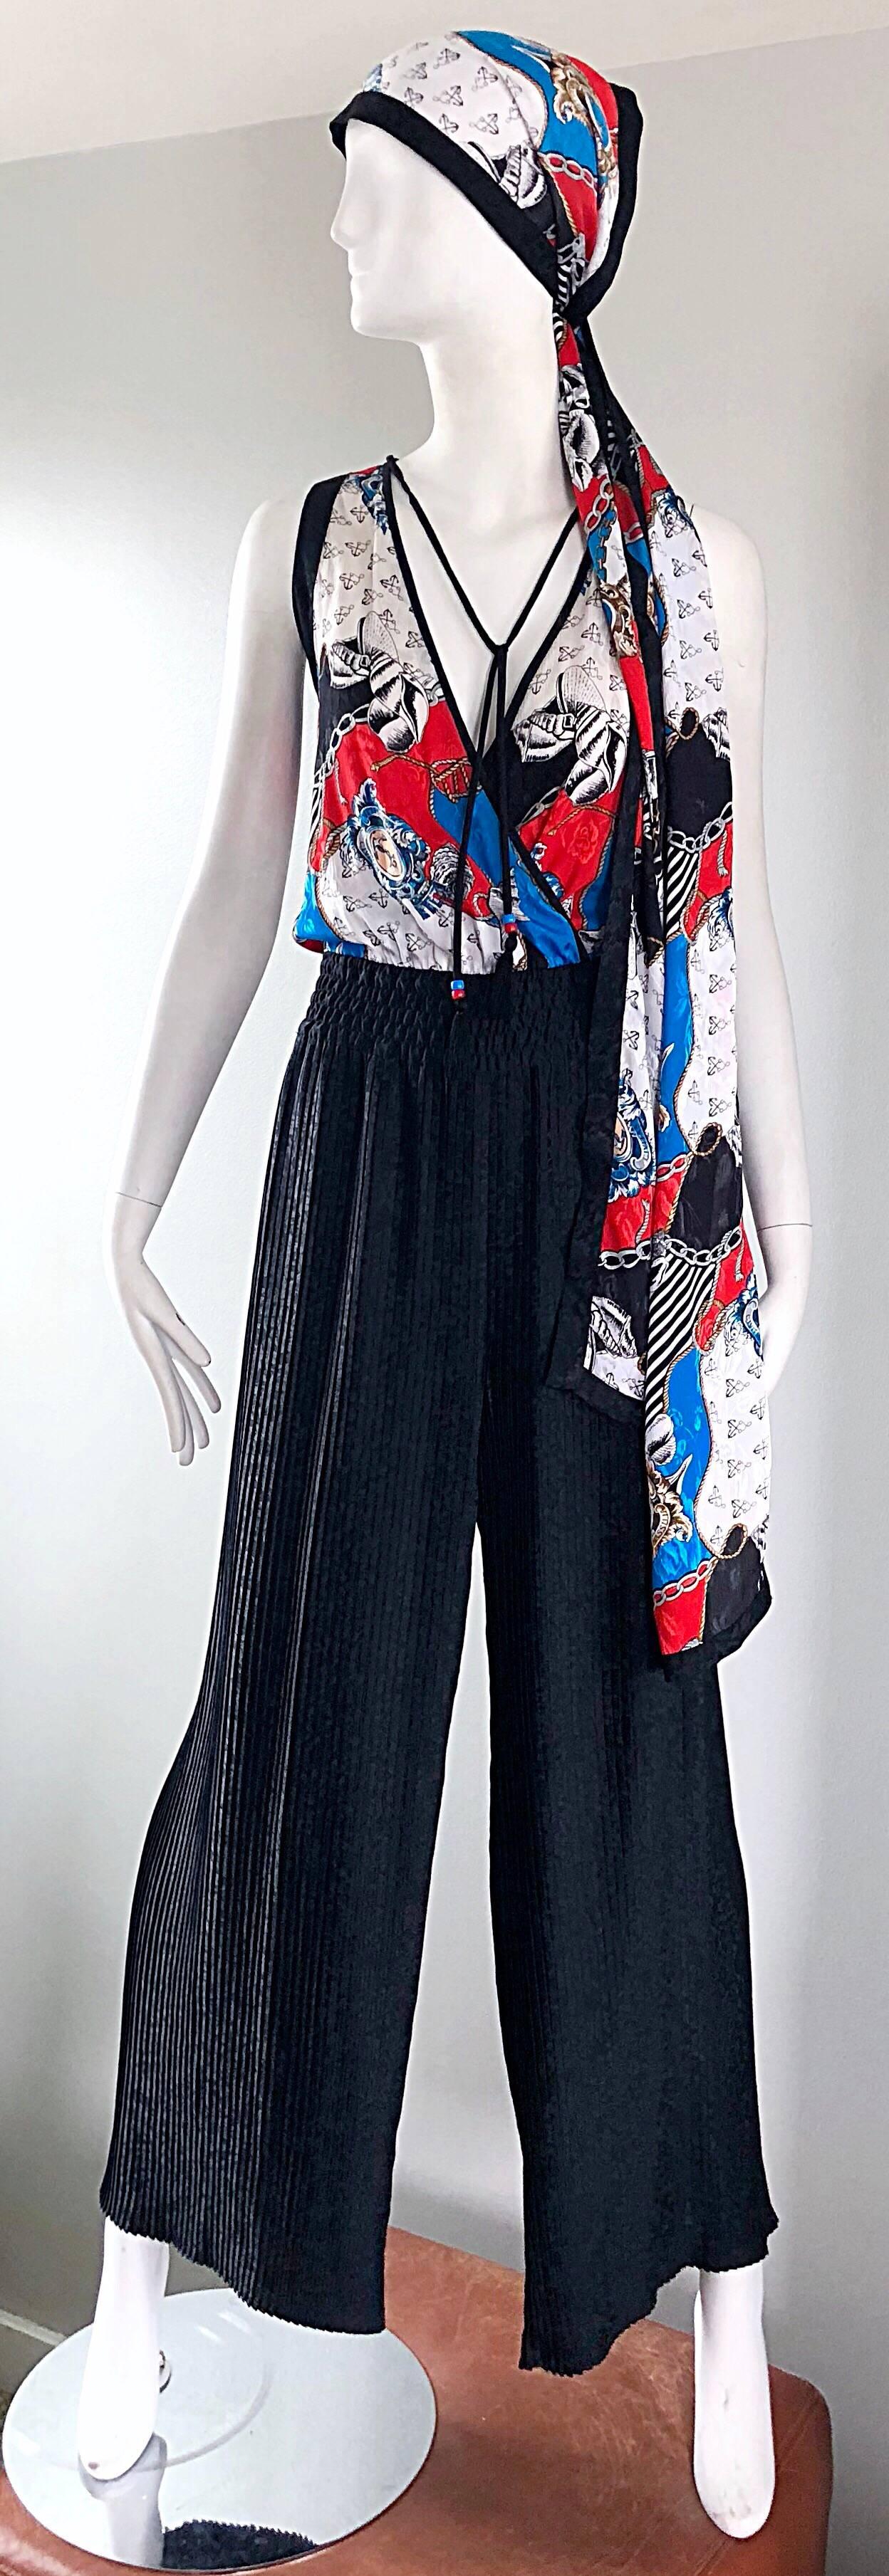 Amazing vintage DIANE FRIES nautical jumpsuit and headscarf / sash belt! Features a nautical print in red, white and blue, of anchors, sea shells, and rope throughout. Beaded tassels at each side of the neck can be tied, or left undone. Sash can